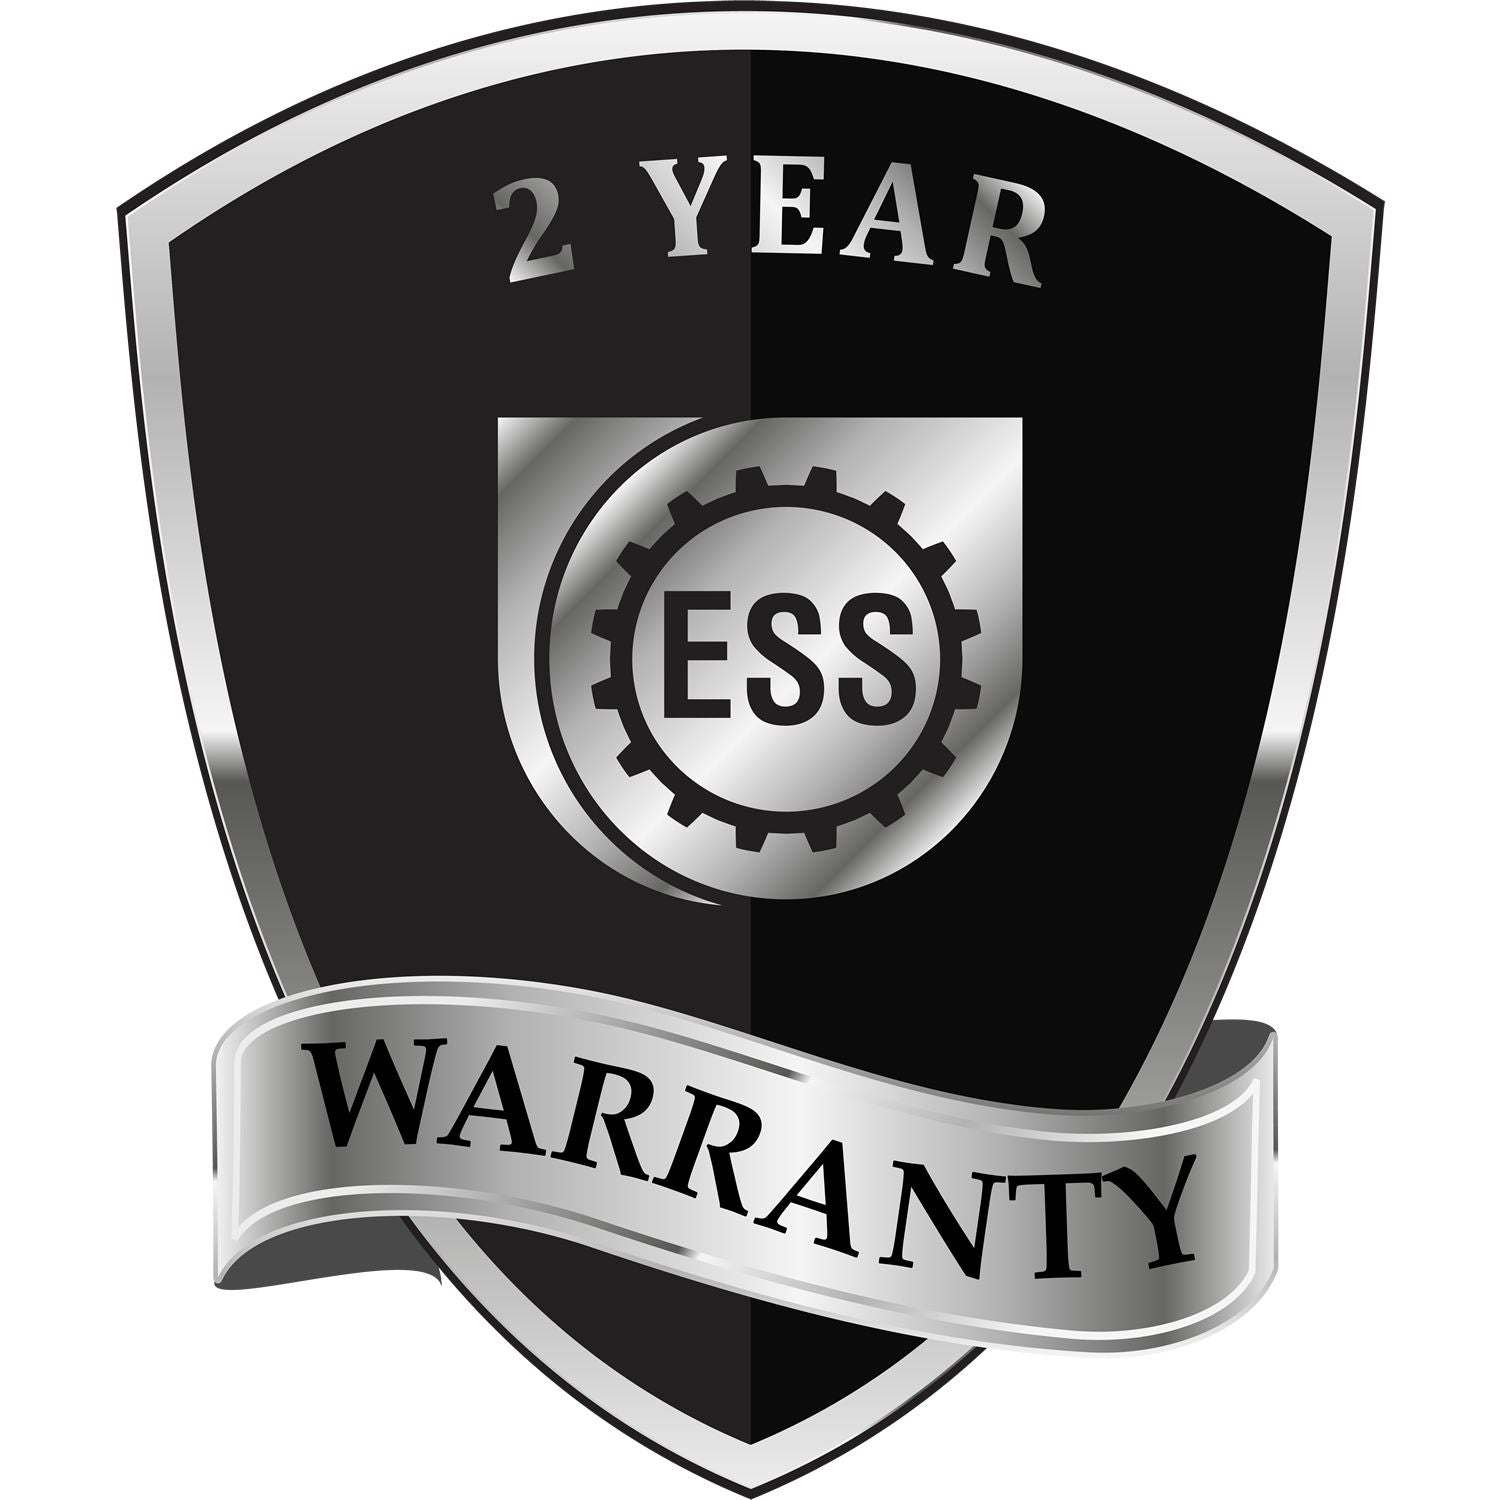 A black and silver badge or emblem showing warranty information for the Gift Wisconsin Landscape Architect Seal